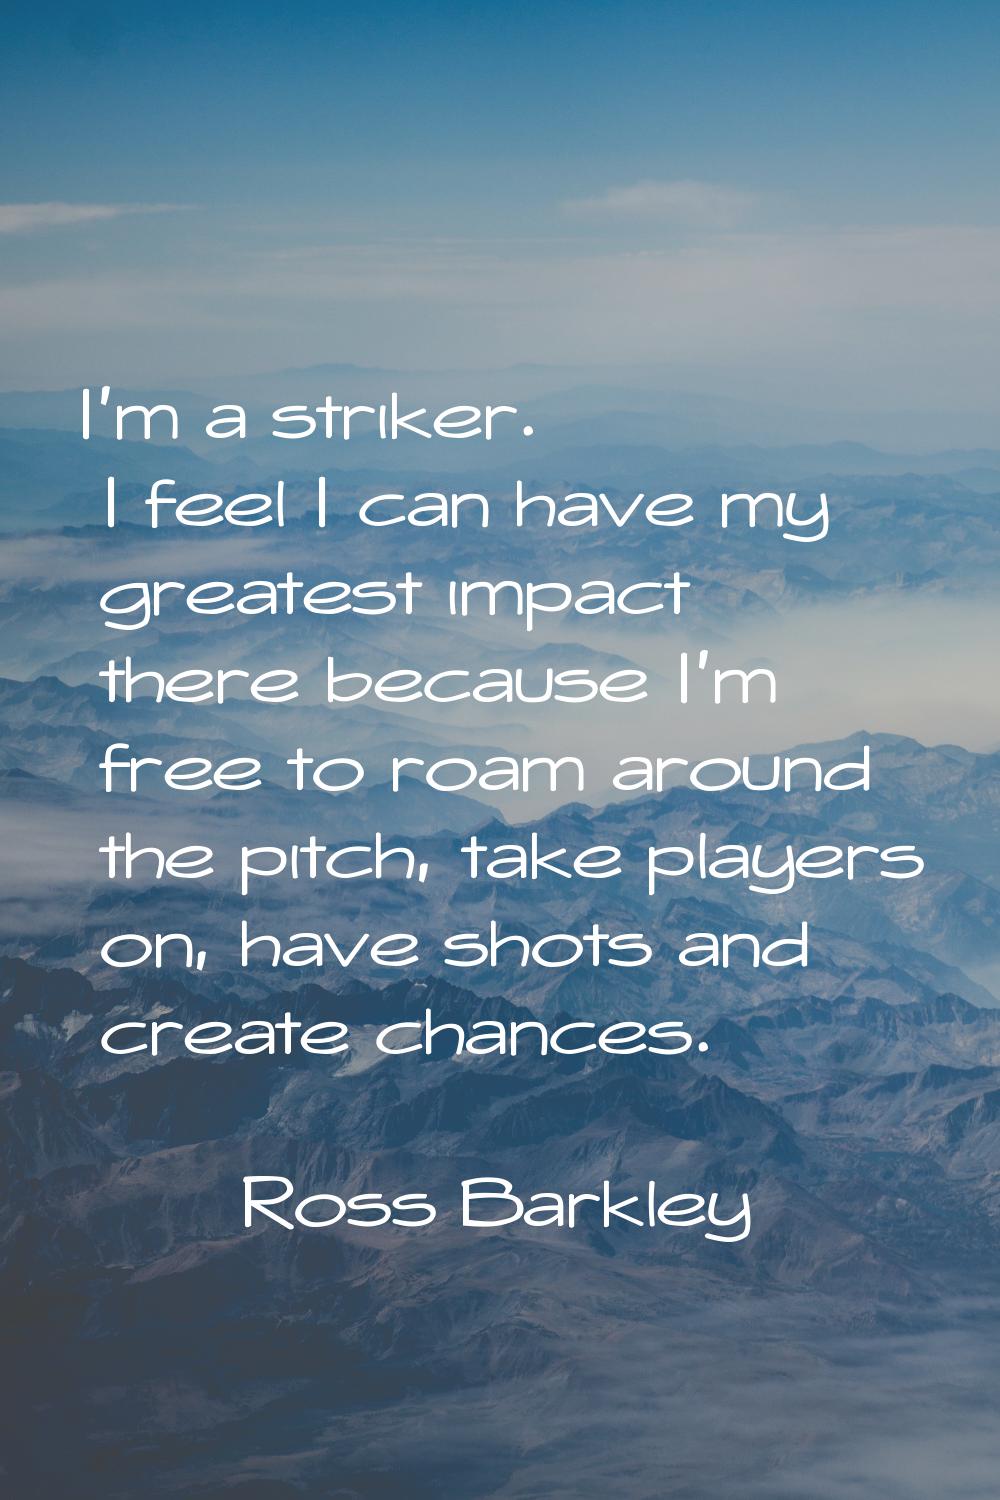 I'm a striker. I feel I can have my greatest impact there because I'm free to roam around the pitch